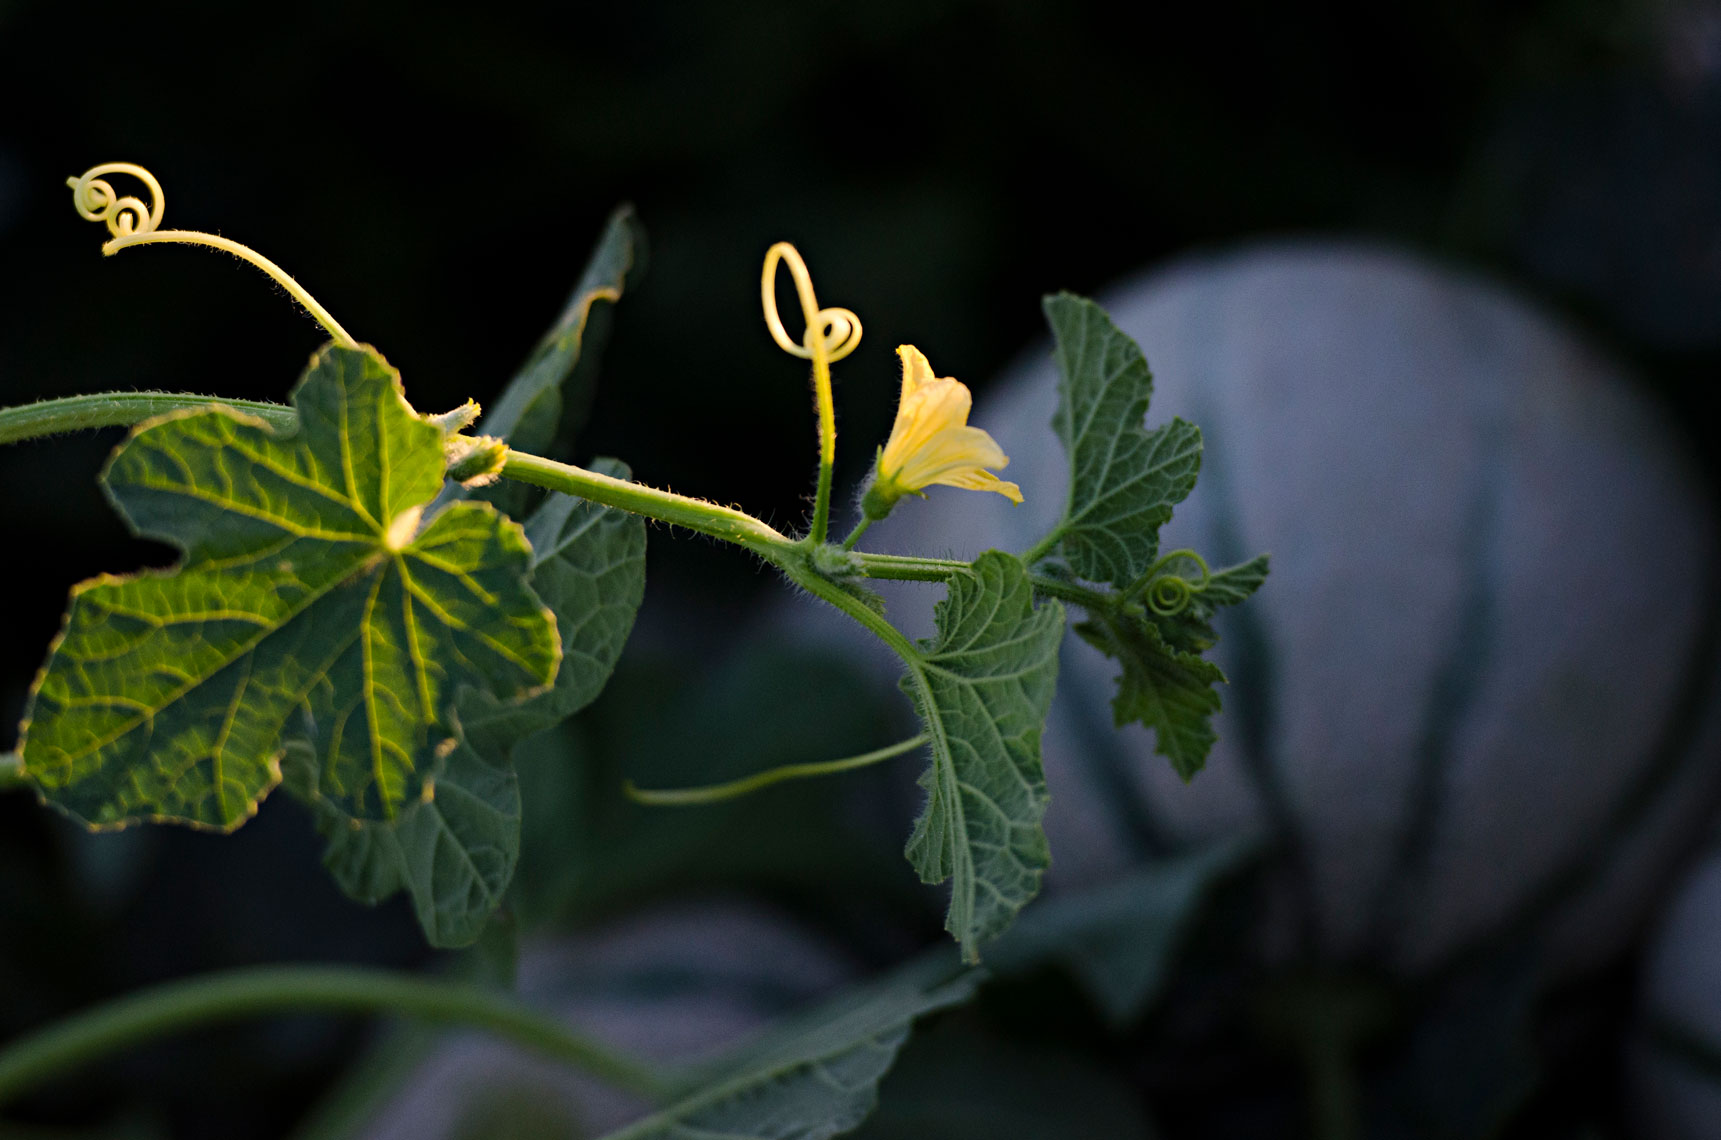 Charentais-French-Melon-in-the-field-at-sunset-wirh-melon-flowers-on-vine-by-produce-photographer-Joe-Atlas.